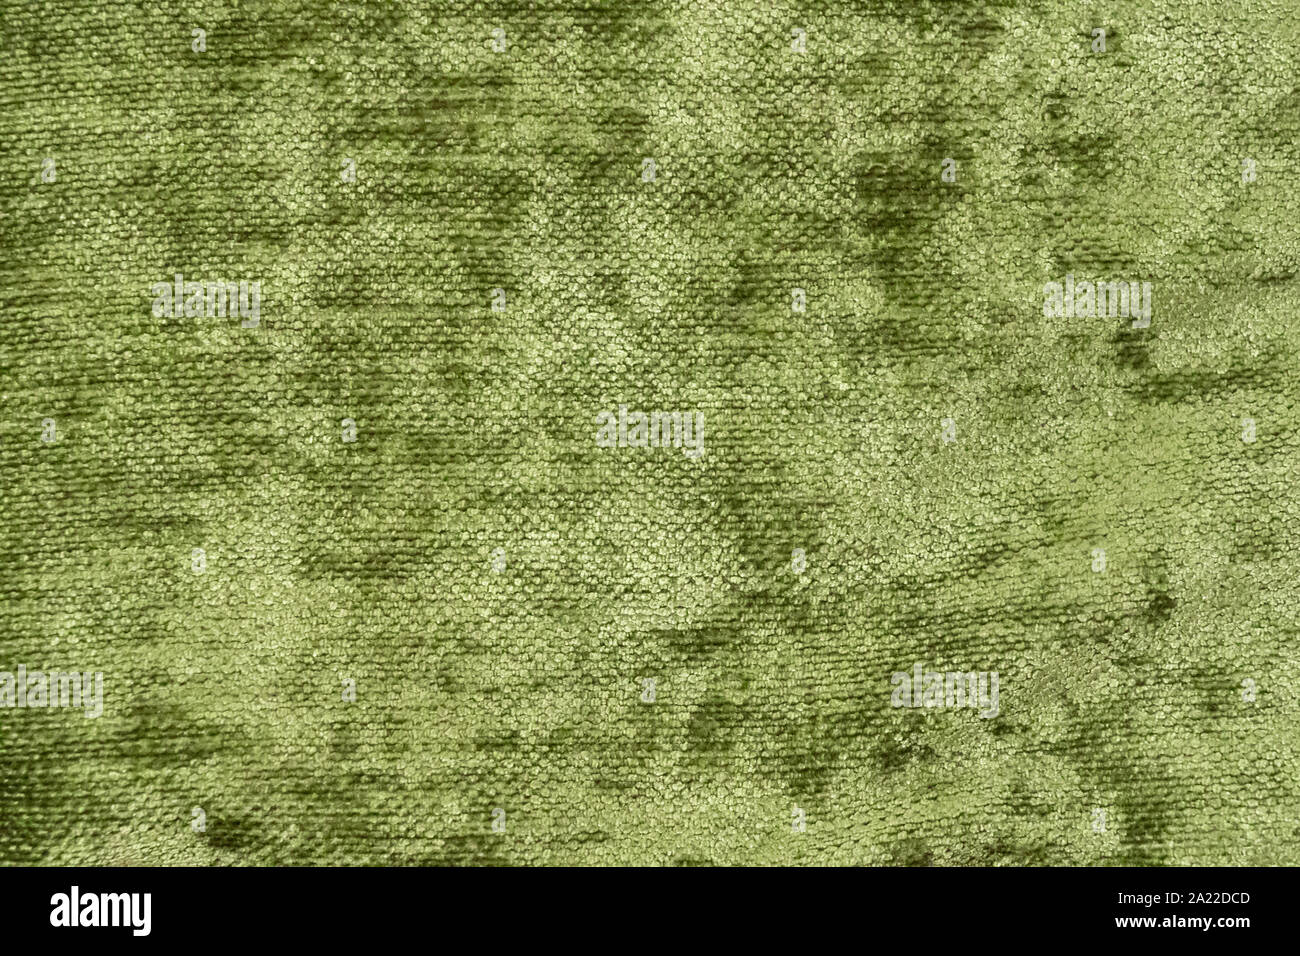 Upholstery green fabric texture. Abstract material pattern for furniture. Grunge virid textile background. Space texture Stock Photo